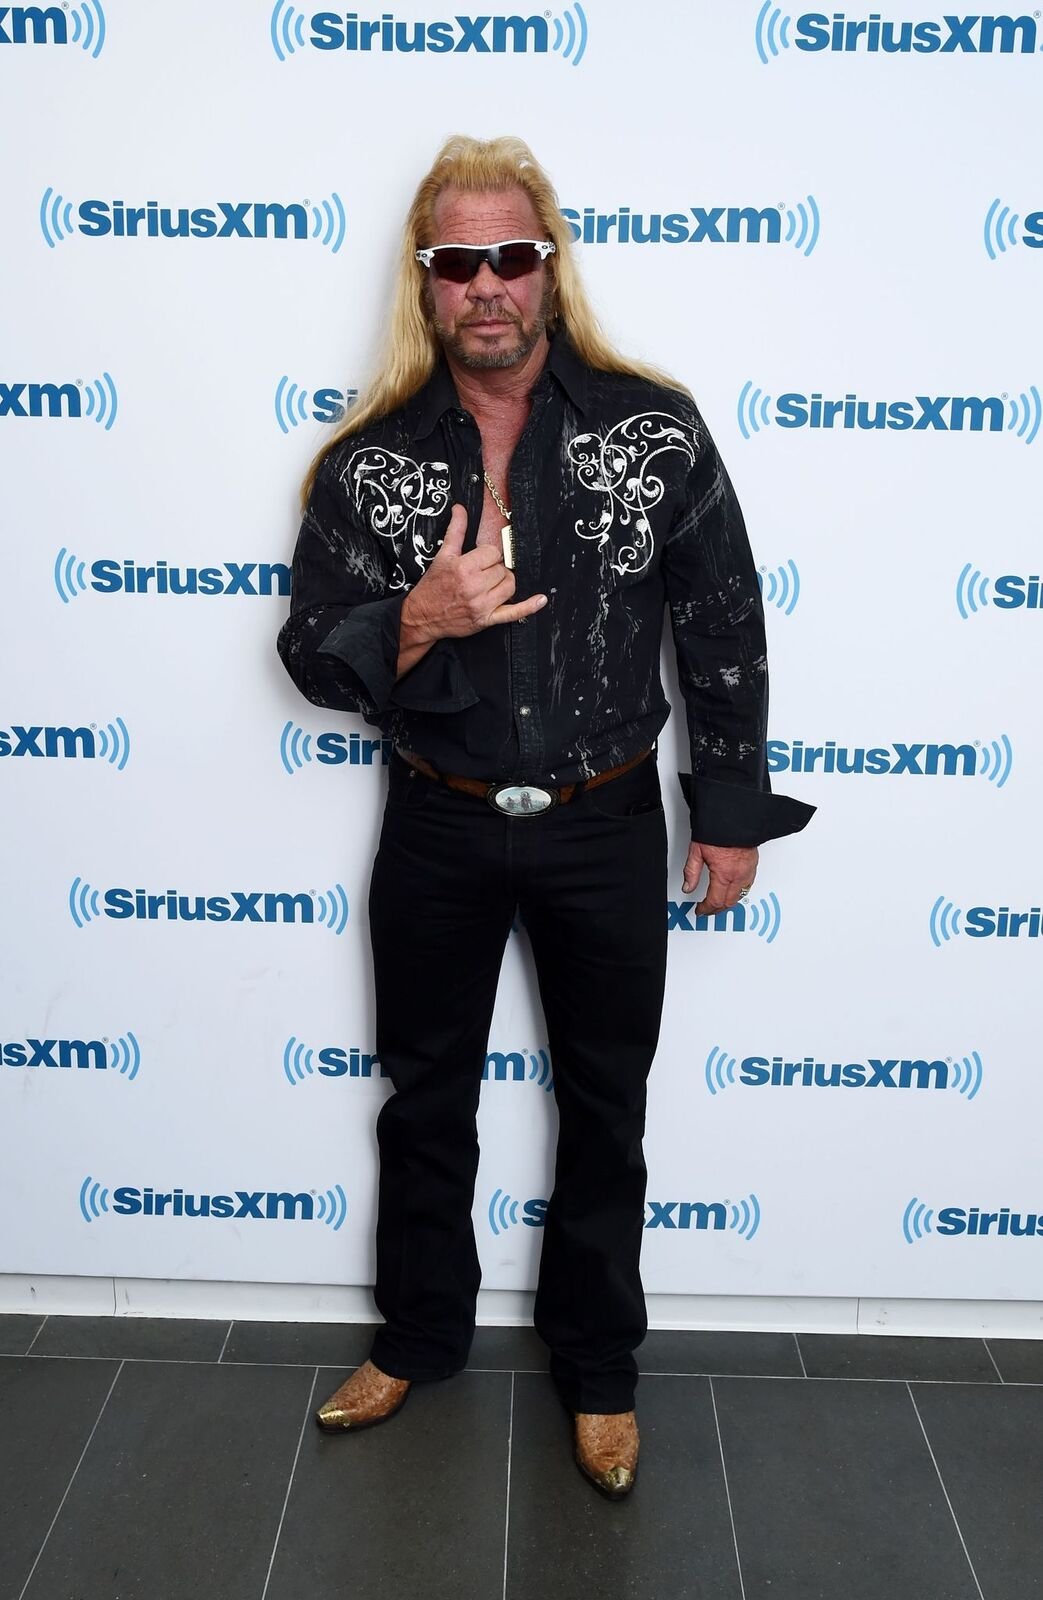 Dog the Bounty Hunter, Duane Chapman visits the SiriusXM Studios on April 24, 2015 | Photo: Getty Images